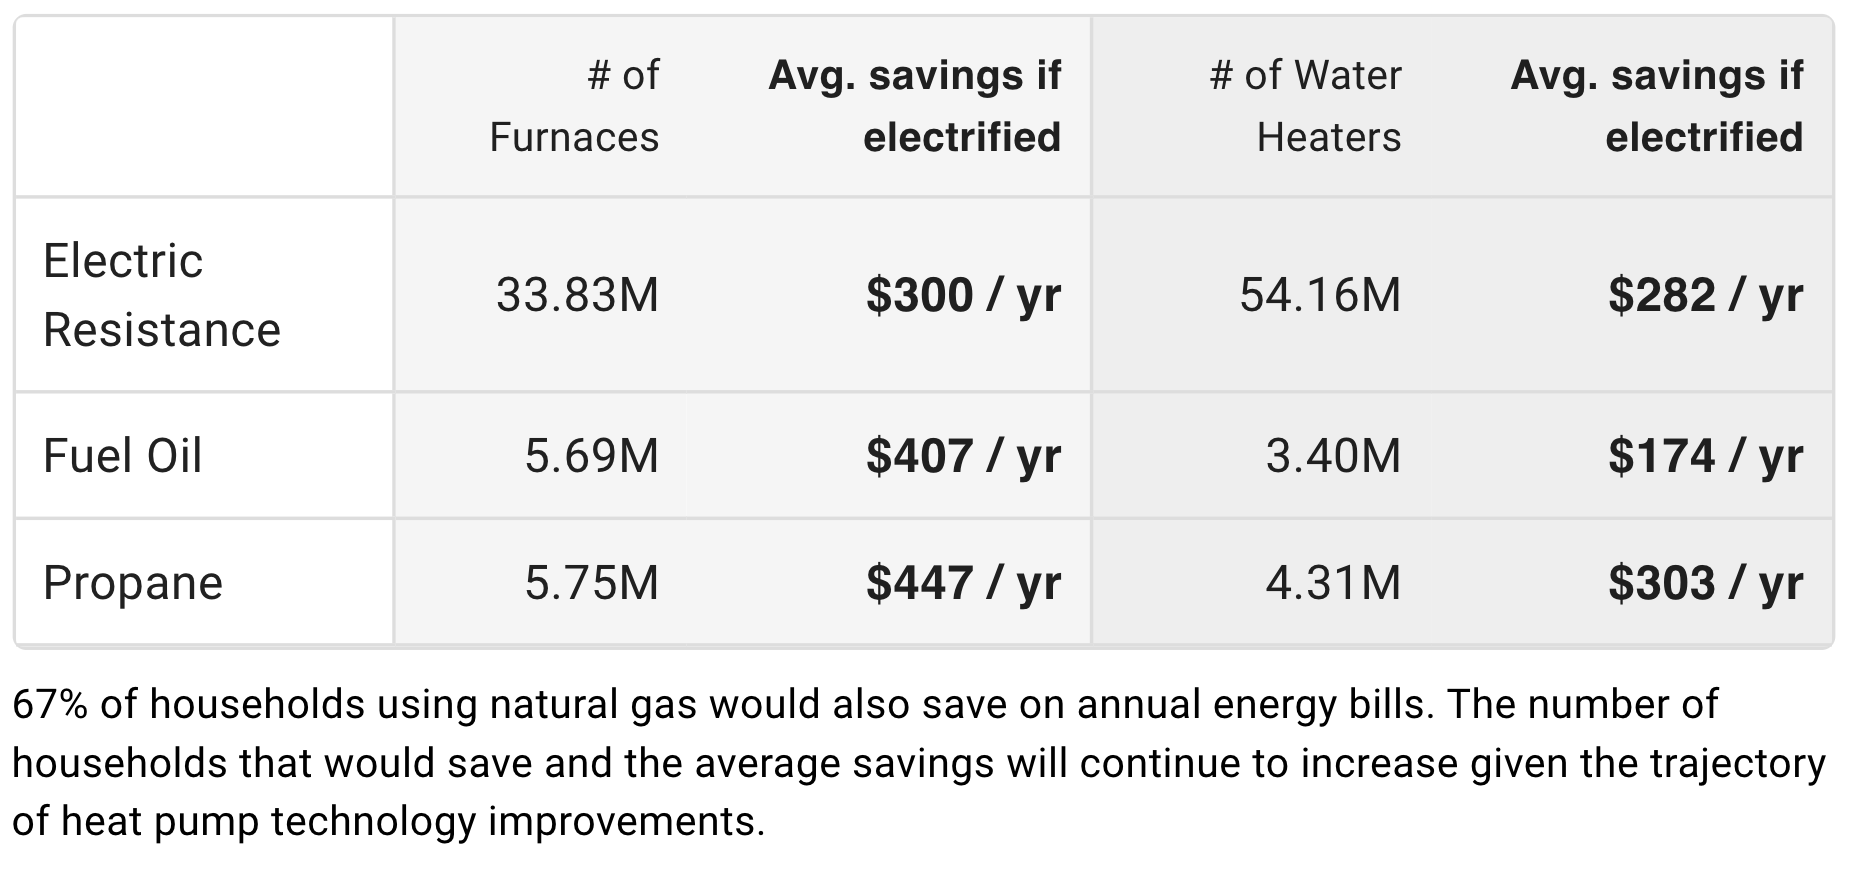 Table showing the large savings households currently using electric resistance, fuel oil, and propane would gain from electrification. Replacing 33.38M electric resistance furnaces, 5.69M fuel oil furnaces, and 5.75M propane furnaces would result in average savings of $300 per year, $407 per year, and $447 per year, respectively. Similarly, replacing 54.16M electric resistance water heaters, 3.4M fuel oil water heaters, and 4.31M propane water heaters would result in average savings of $282 per year, $174 per year, and $303 per year, respectively.